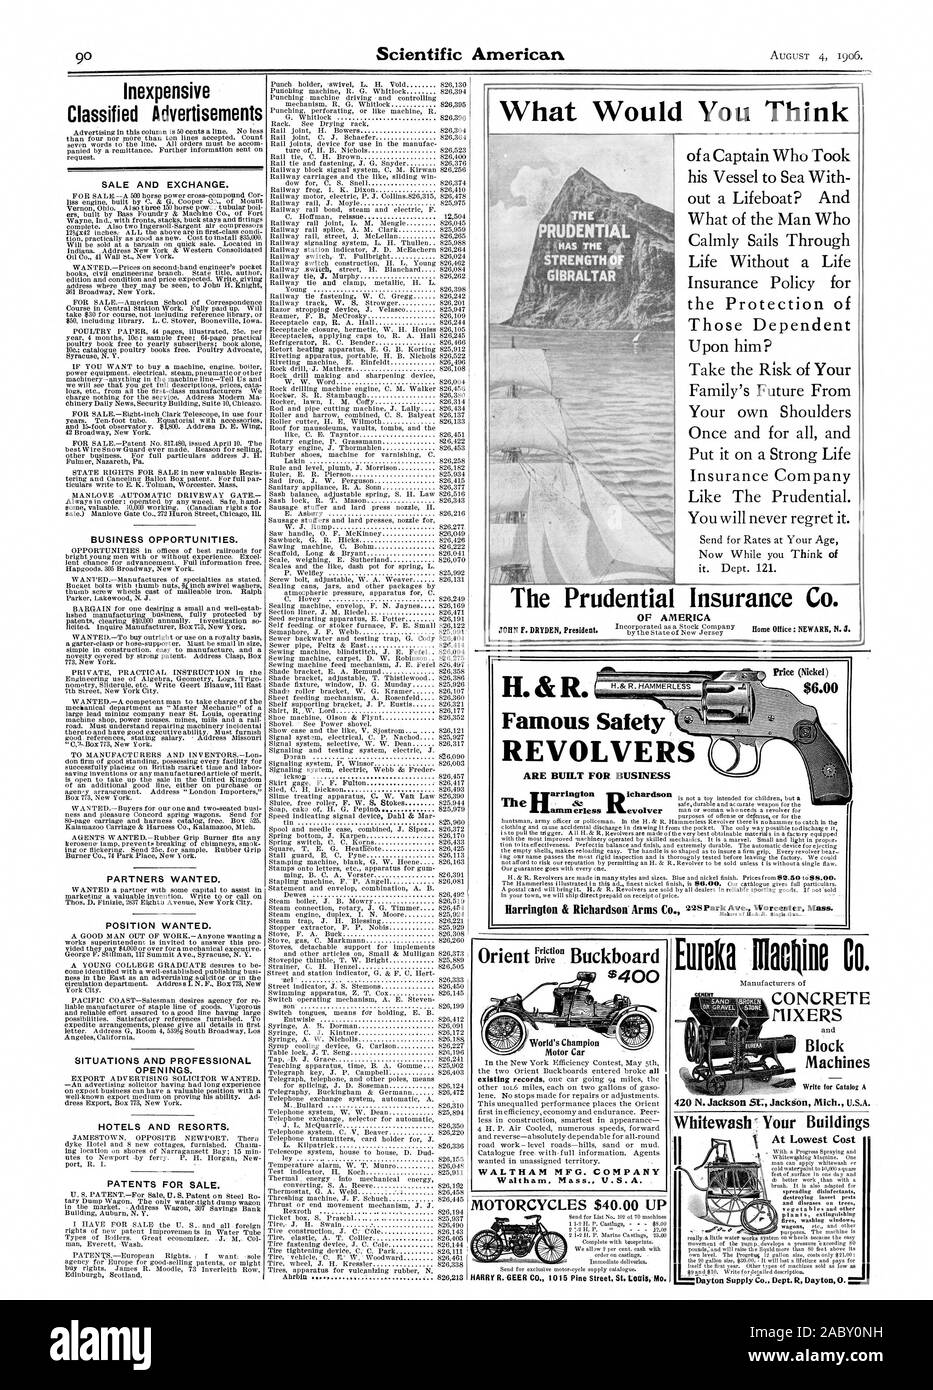 Inexpensive Classified Advertisements SALE AND EXCHANGE. BUSINESS OPPORTUNITIES. PARTNERS WANTED. POSITION WANTED. SITUATIONS AND PROFESSIONAL OPENINGS. HOTELS AND RESORTS. PATENTS FOR SALE. World's Champion Motor Car WALTHAM MFG. COMPANY Waltham Mass. U.S.A. MOTORCYCLES $40.00 UP HARRY R. GEER CO. 1015 Pine Street St. Writ Mo. Write for Catalog A 420 N. Jackson SG Jackson Mich. U.S.A. At Lowest Cost What Would You Think The Prudential of a Captain Who Took his Vessel to Sea With out a Lifeboat? And What of the Man Who Calmly Sails Through Life Without a Life Insurance Policy for the Stock Photo